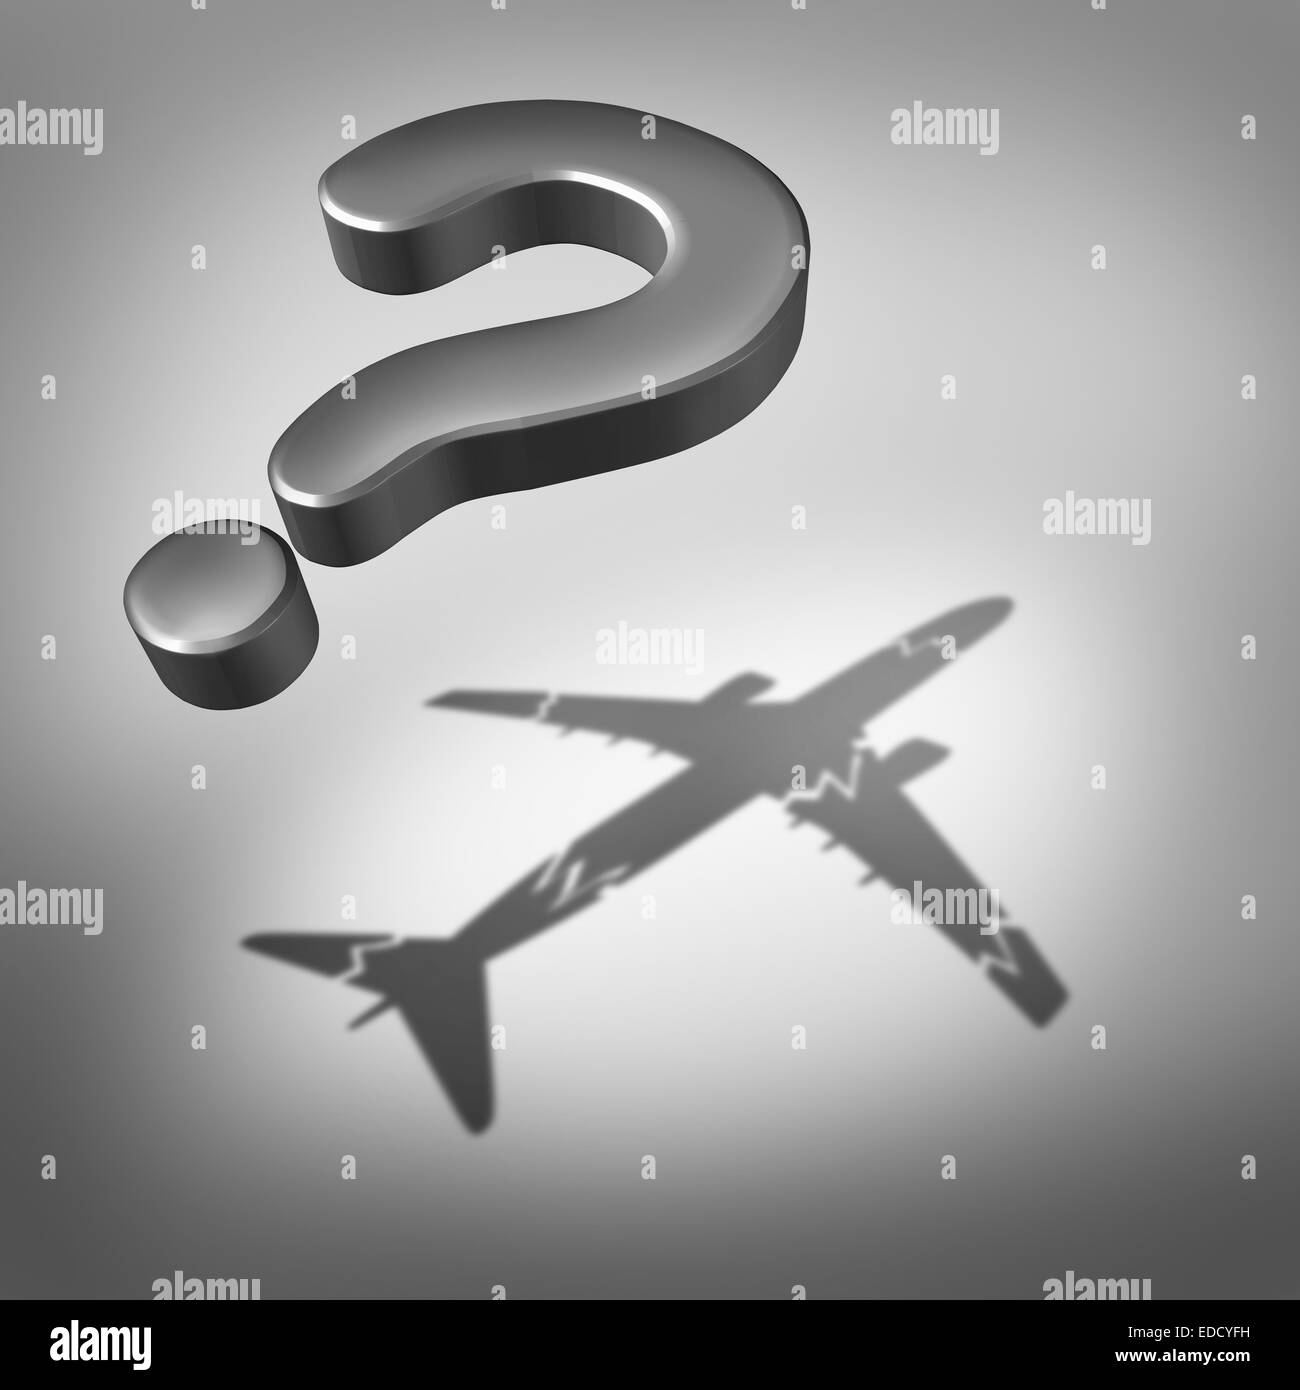 Aviation disaster question and air safety concept as a flying three dimensional question mark with a cast shadow of a damaged airplane as a symbol for uncertainty. Stock Photo